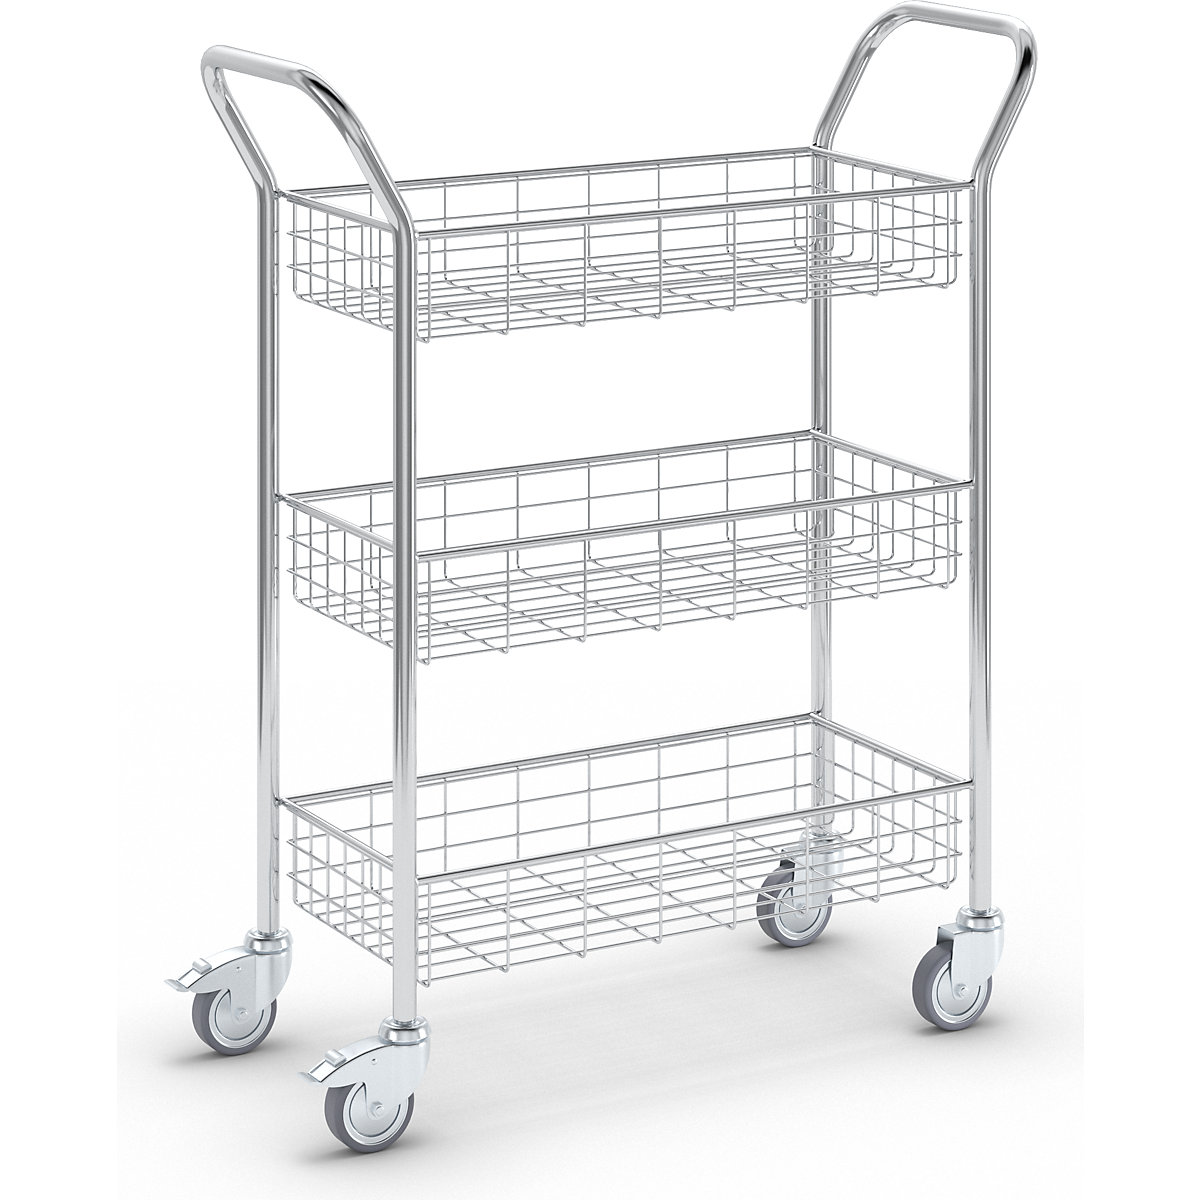 Office and mail distribution trolley – eurokraft pro, max. load 200 kg, white aluminium, LxWxH 1005 x 380 x 1245 mm, 3 shelves-2